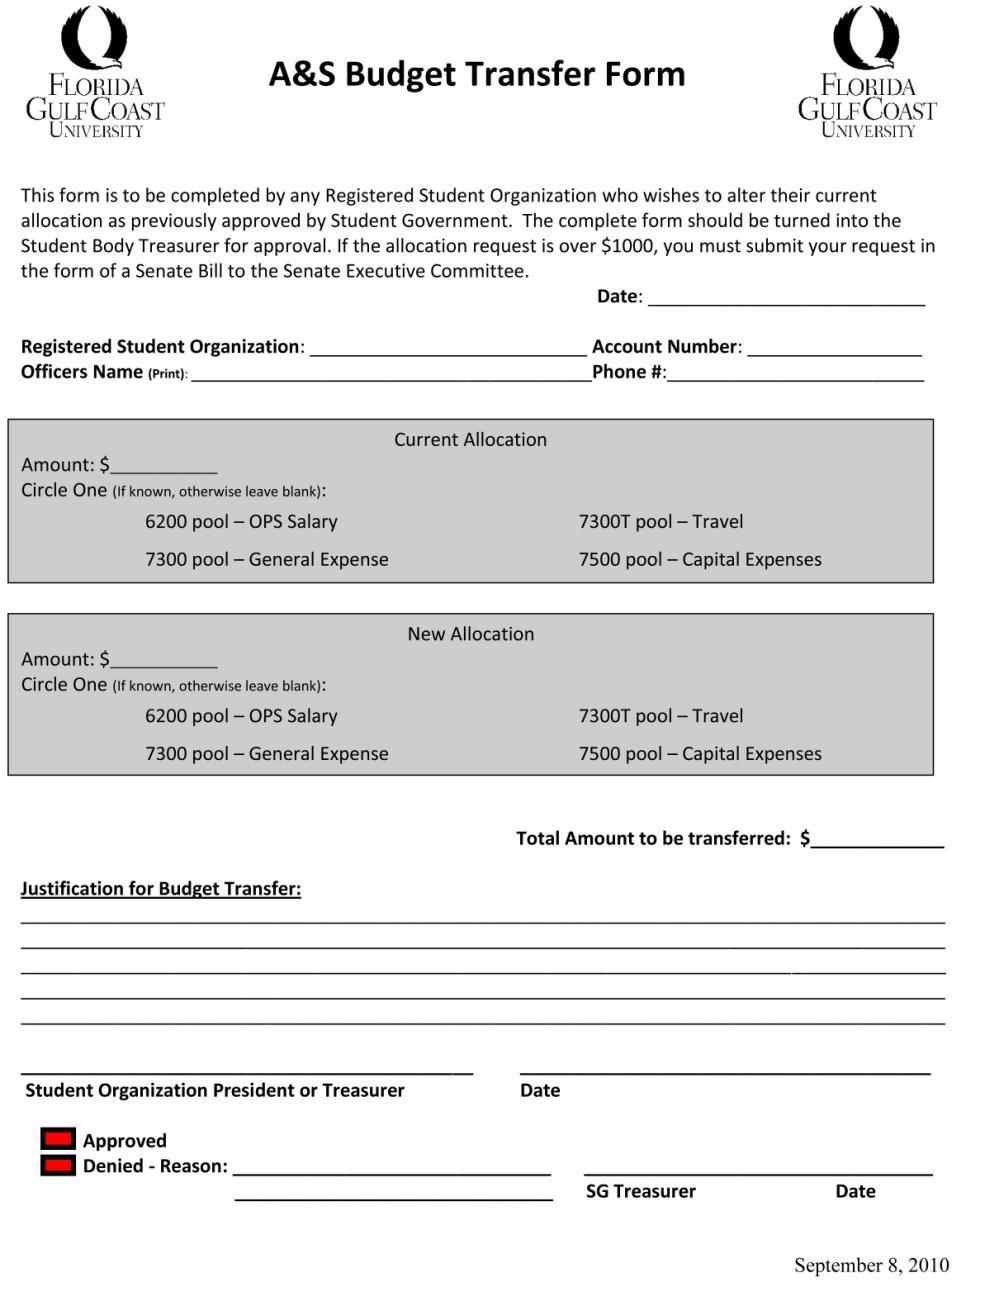 A&S BUDGET TRANSFER FORM A&S Budget Transfer Use this form to move money between the budget pools.